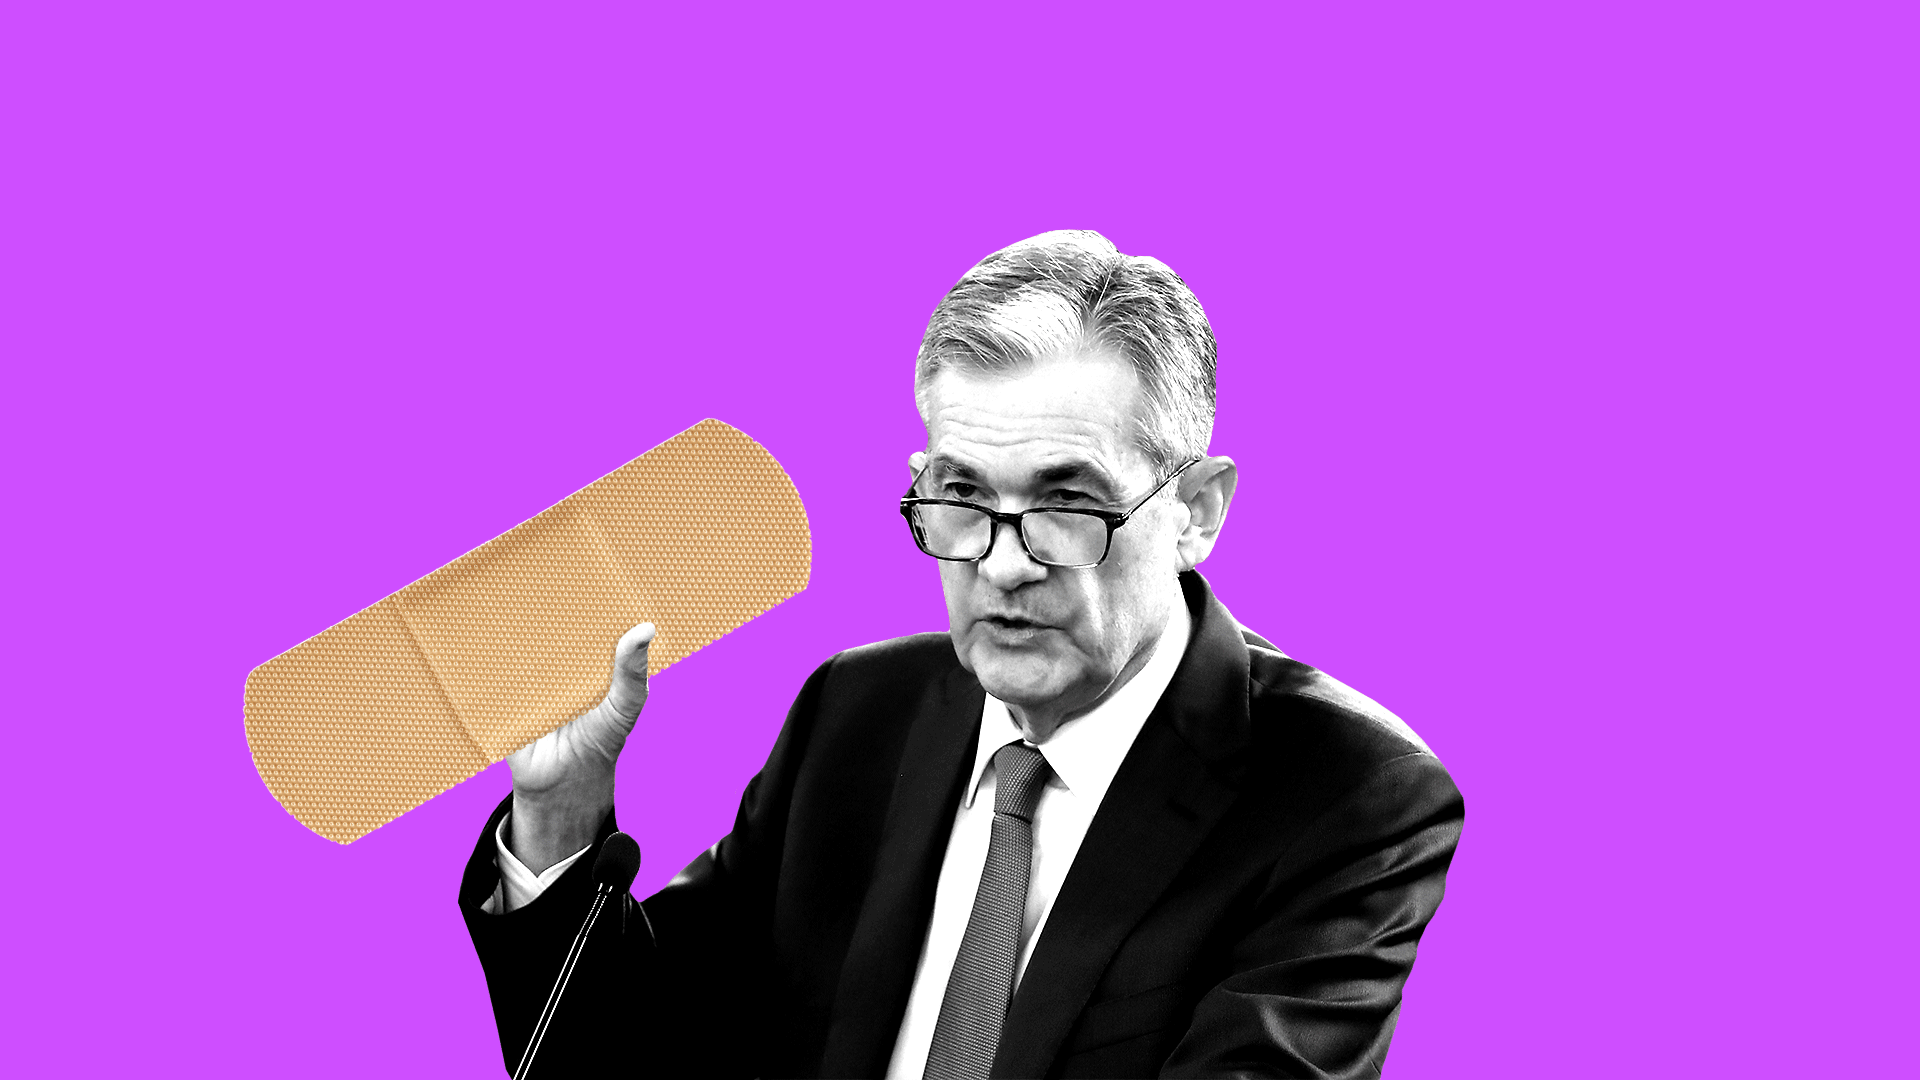 Illustration of Jerome Powell holding up a large band aid.